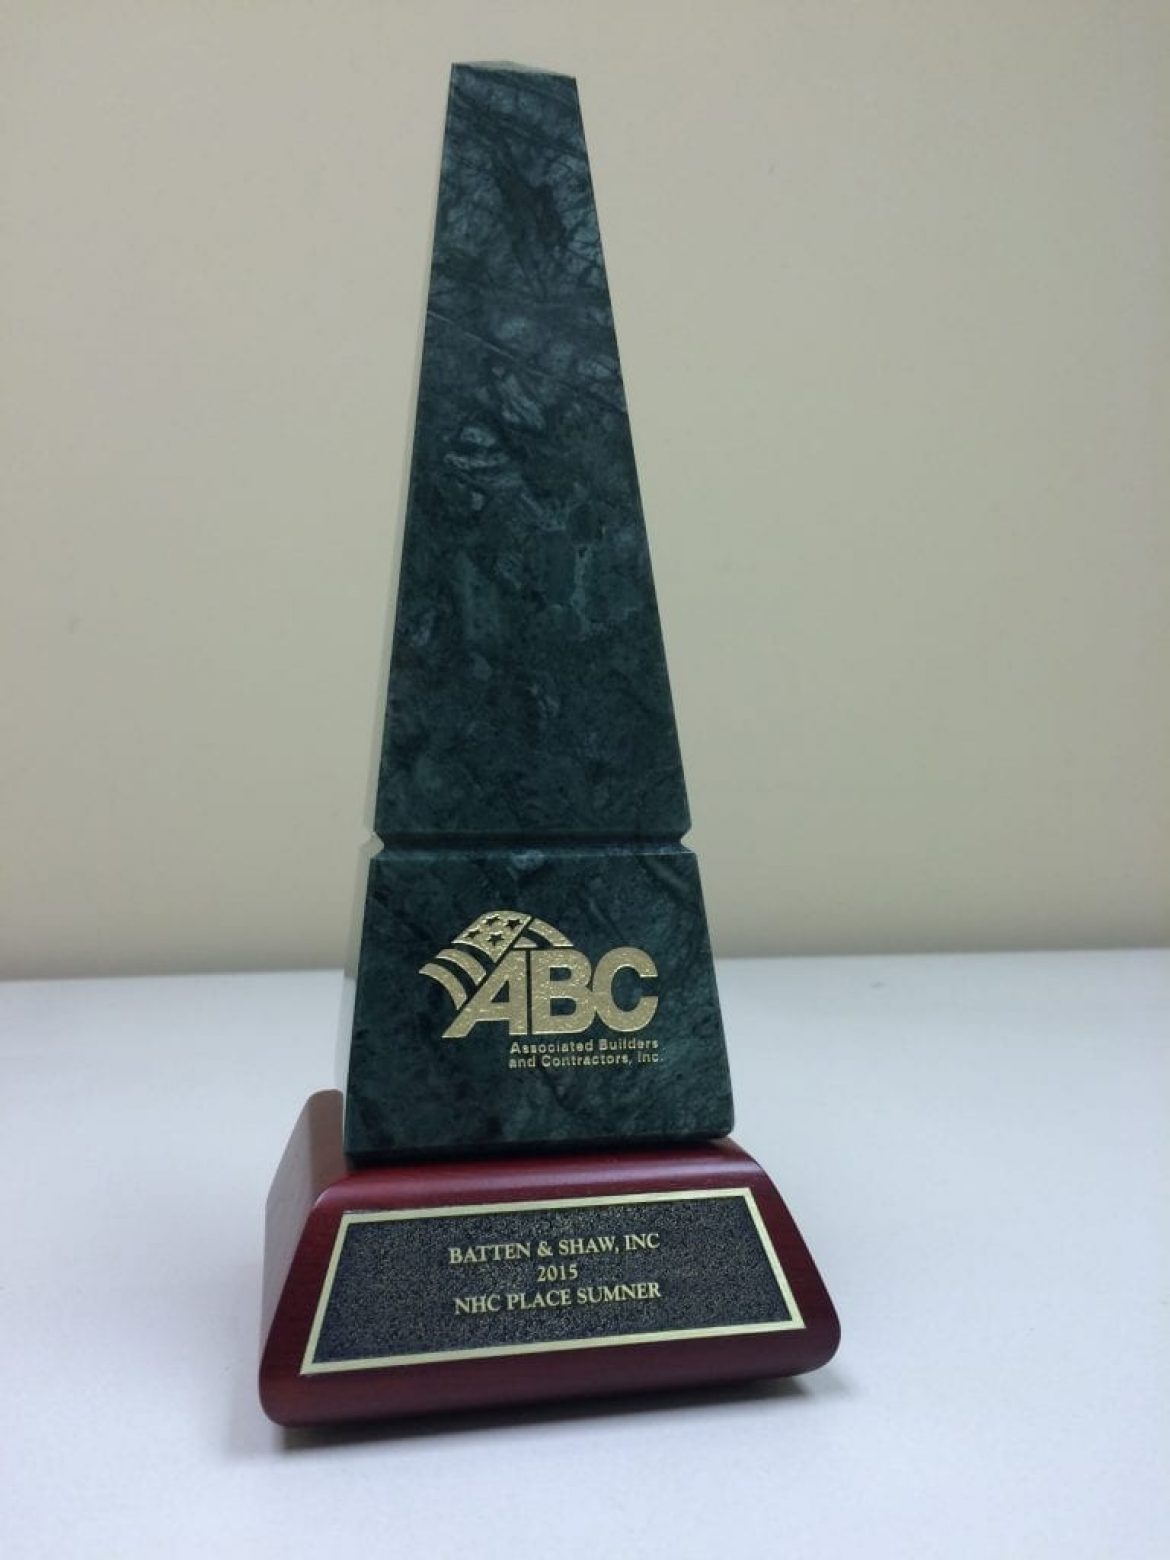 2015 ABC Award of Excellence – NHC Place Sumner